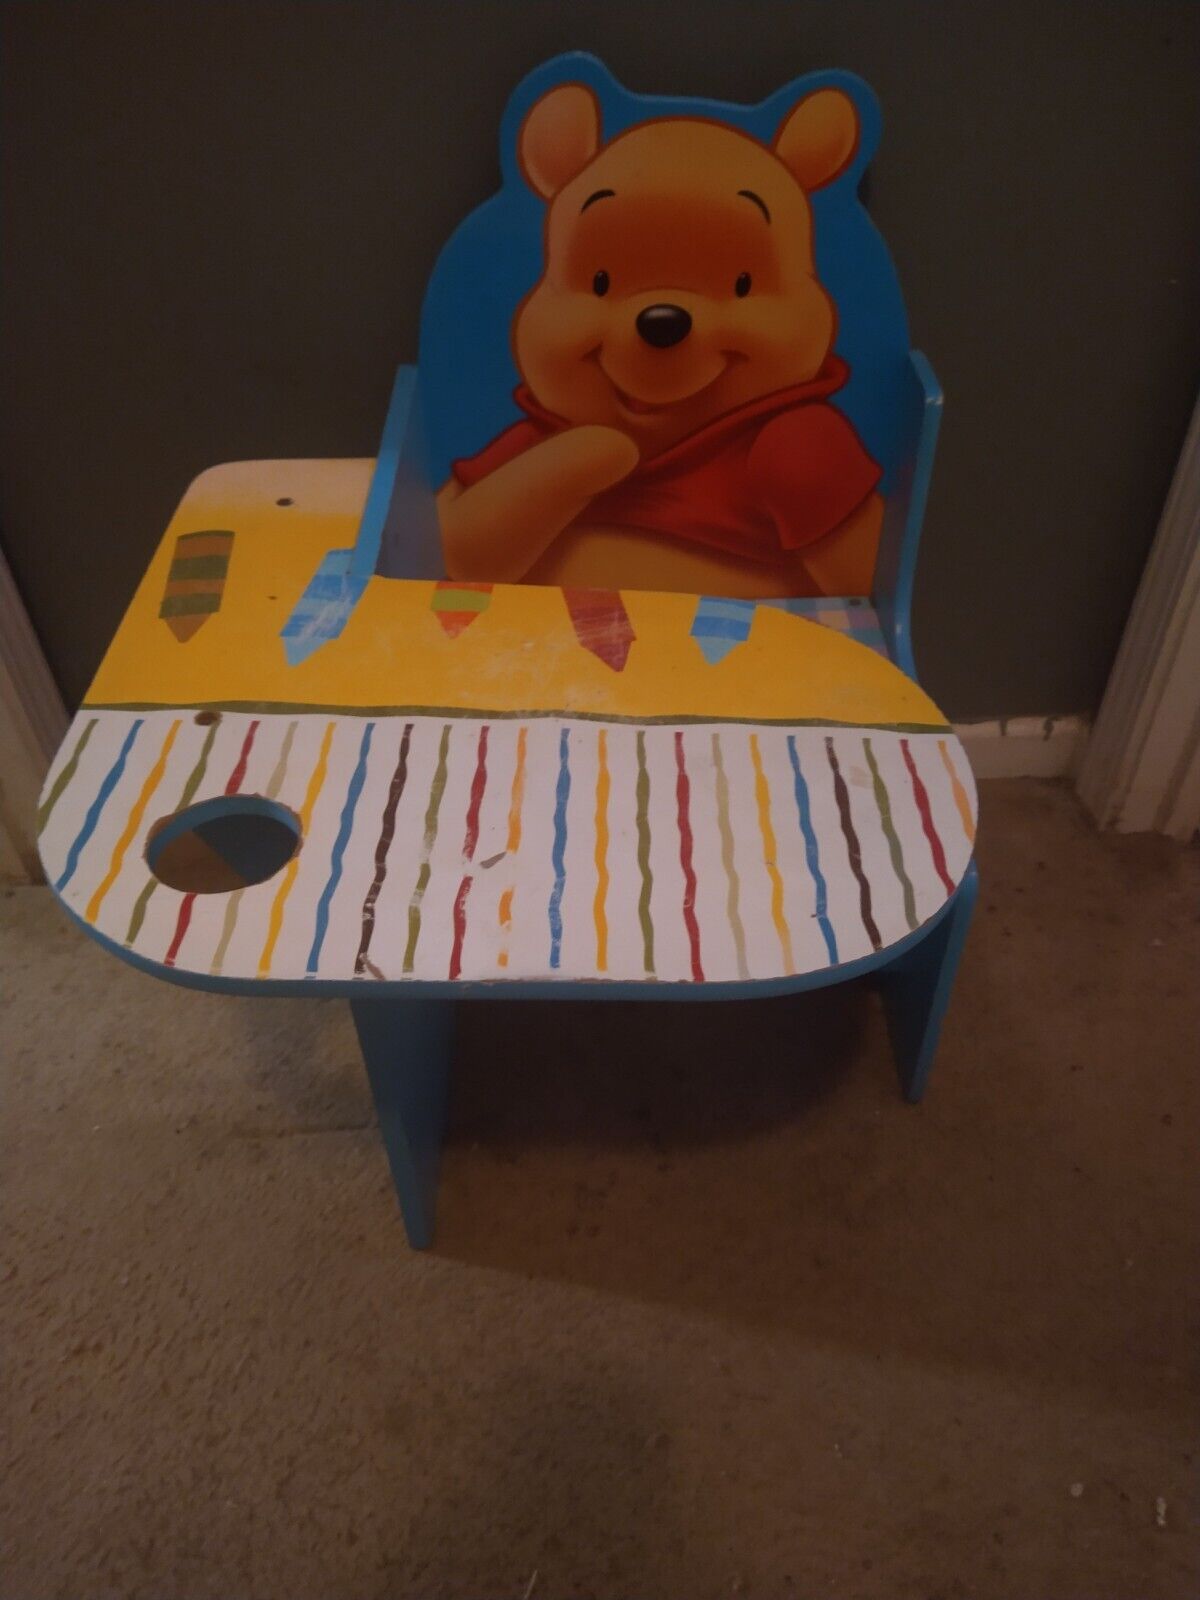 Classic Winnie the pooh desk and chair Rare Collectable Decor Furniture 